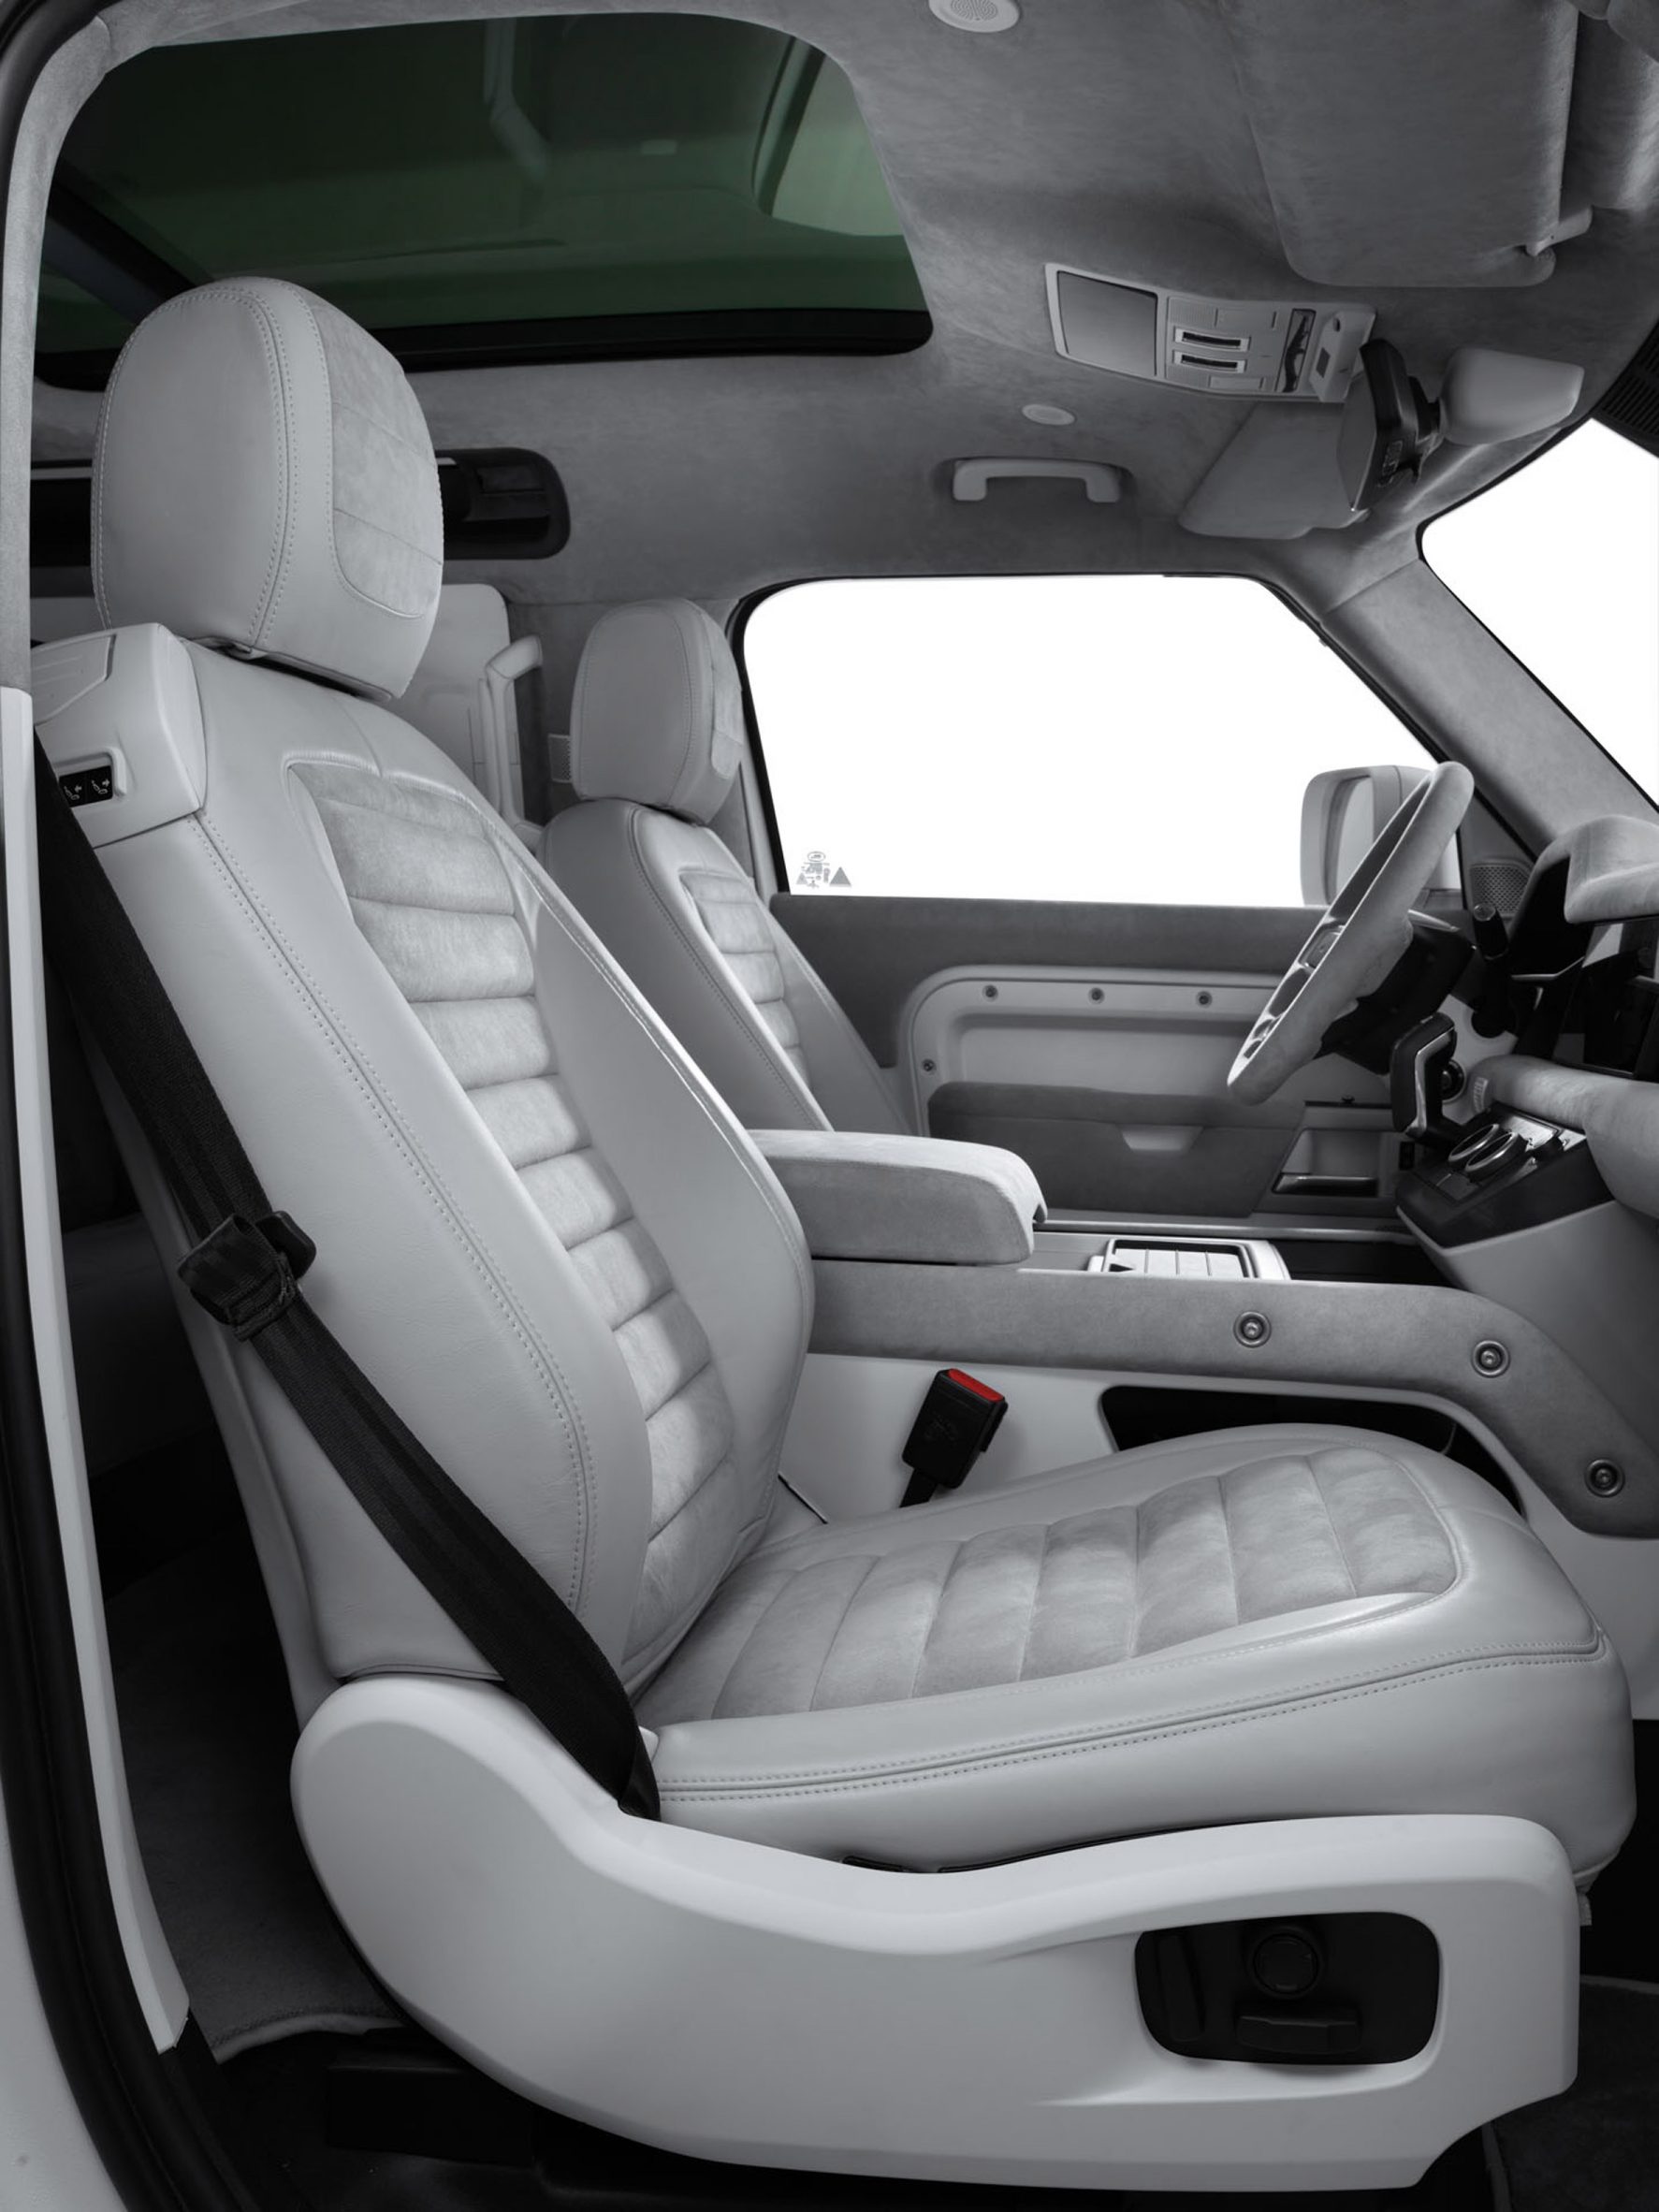 Photo of the seats within the Firmship-styled Land Rover Defender showing ribbing on the seats